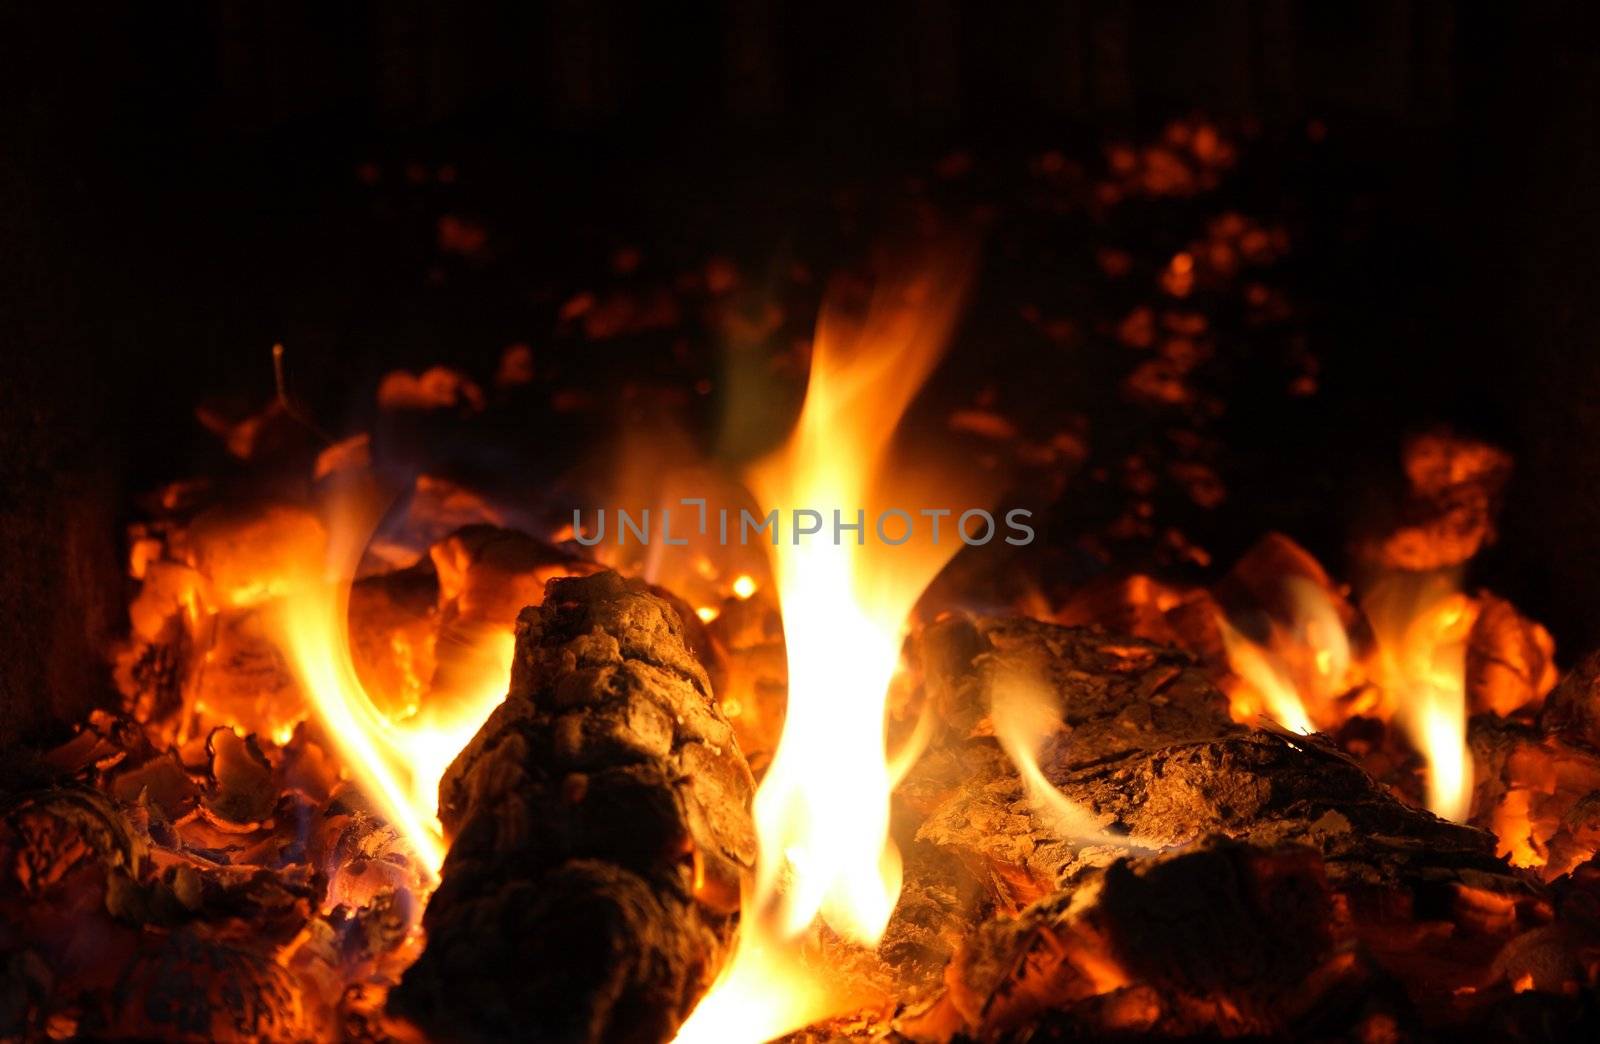 Warmth of the fireplace � flames and ember.